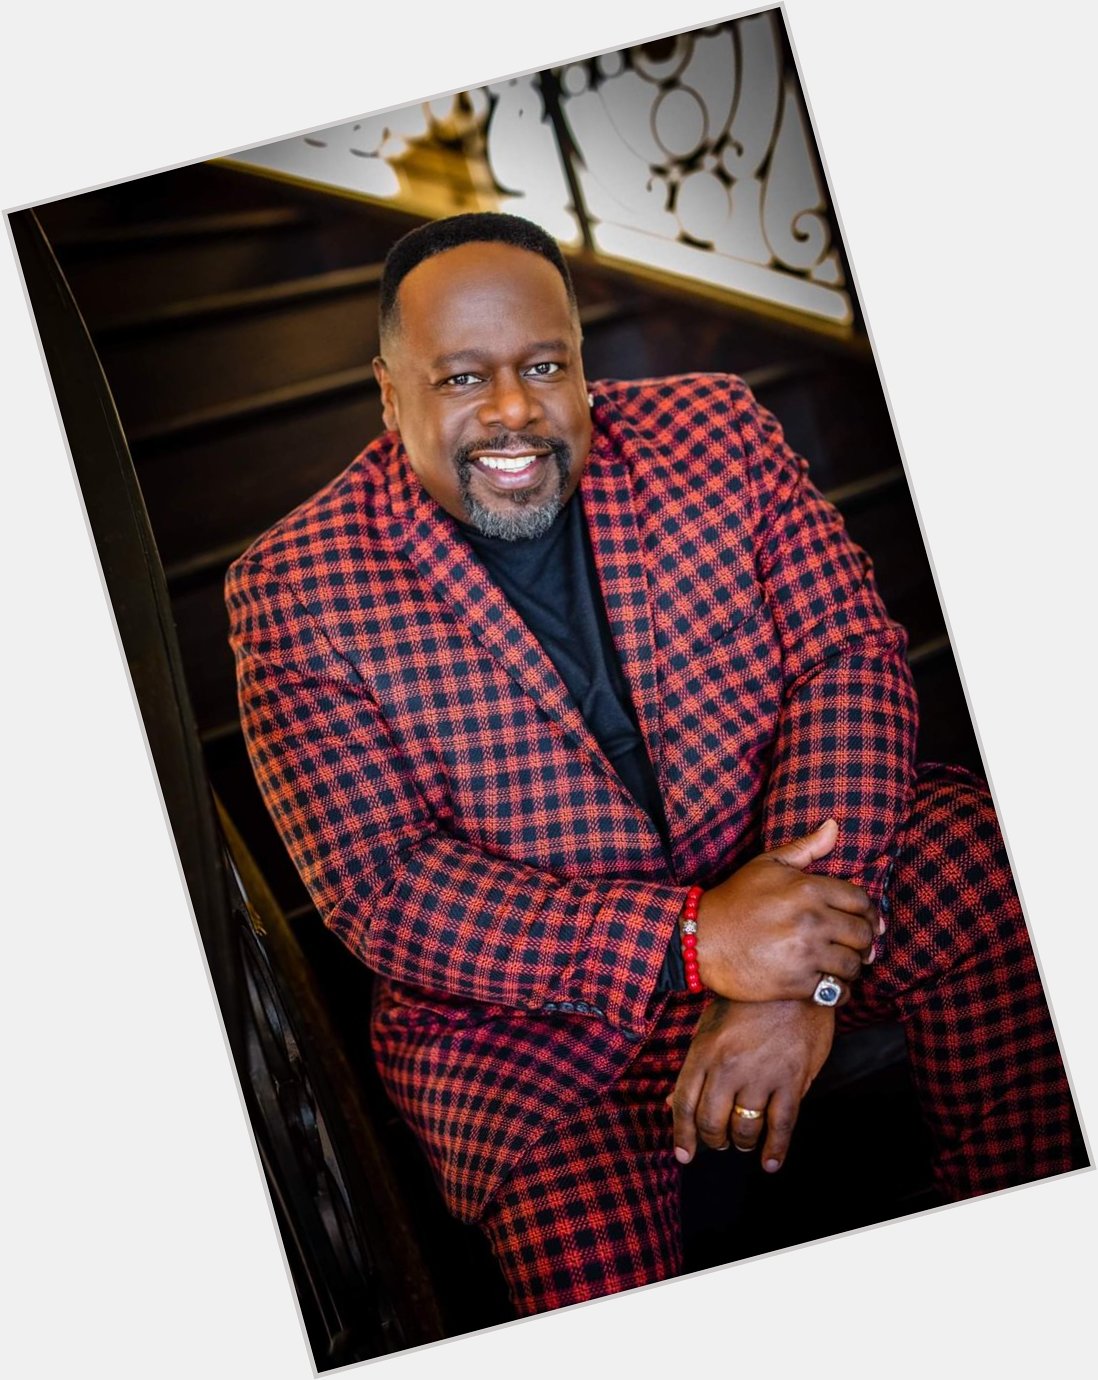 Cedric the Entertainer...April 24, 1964
HAPPY BIRTHDAY
actor, stand-up comedian 